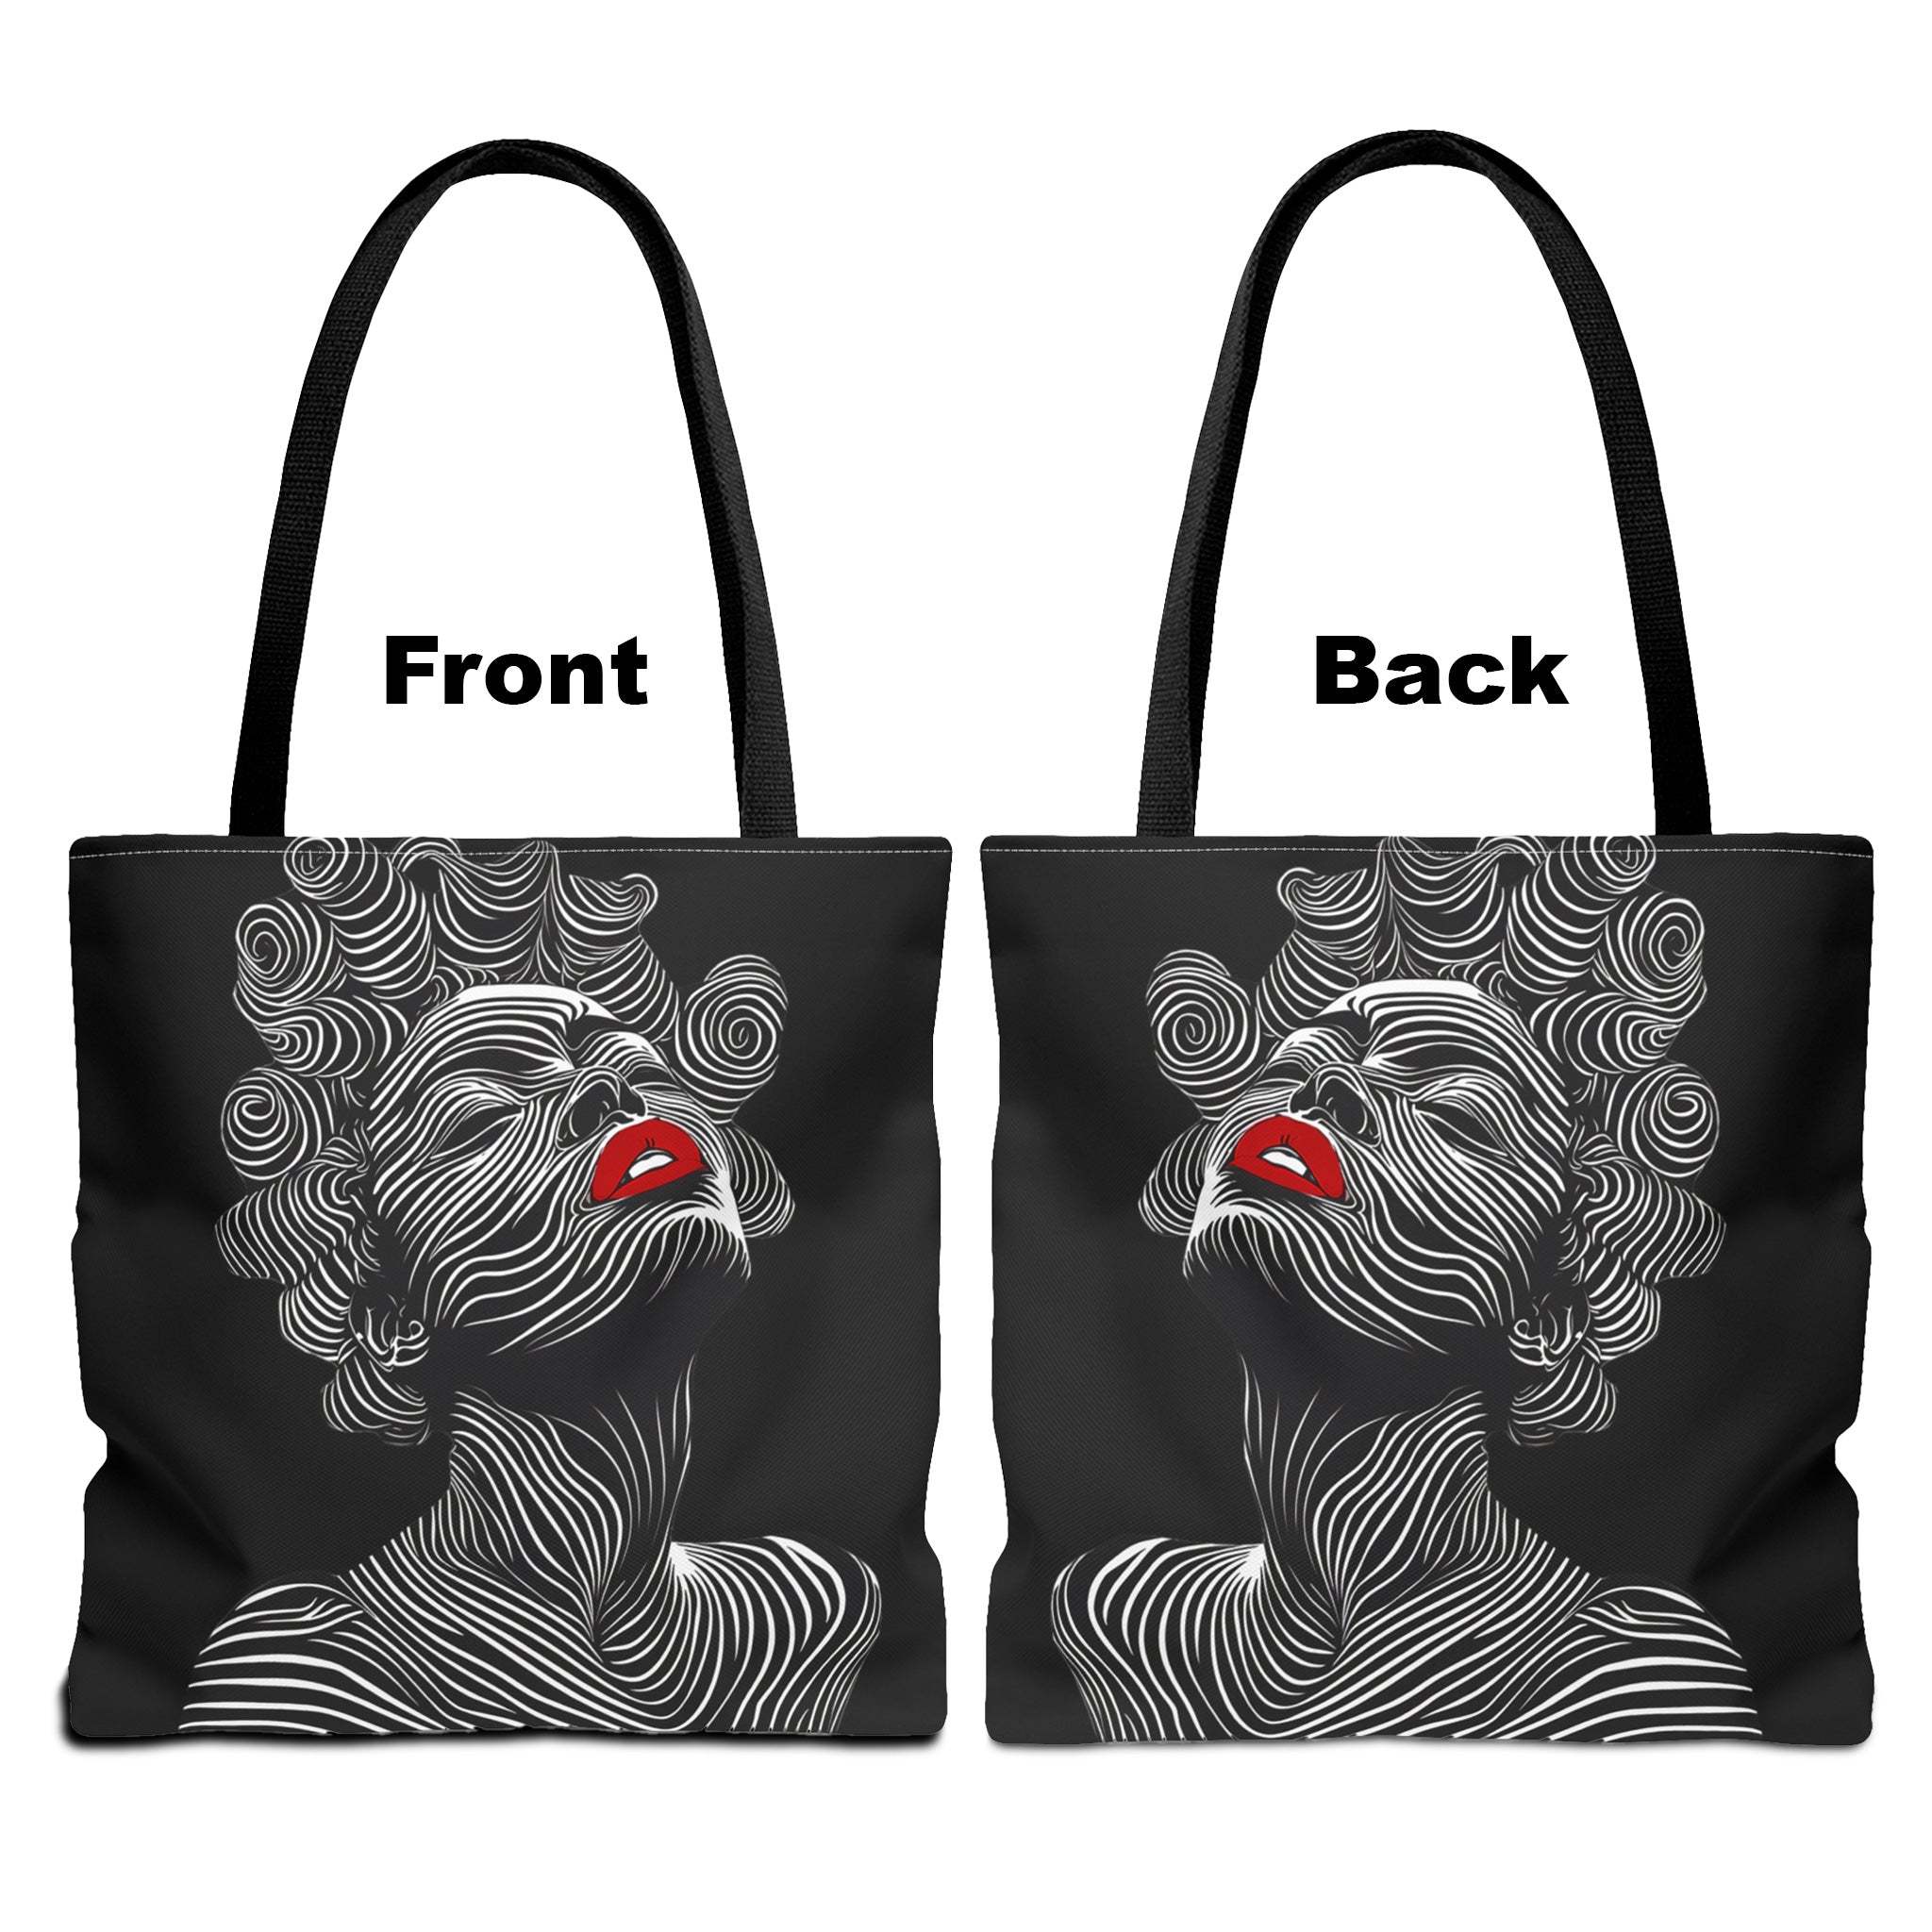 Front and back view of Bantu Knots tote bag.